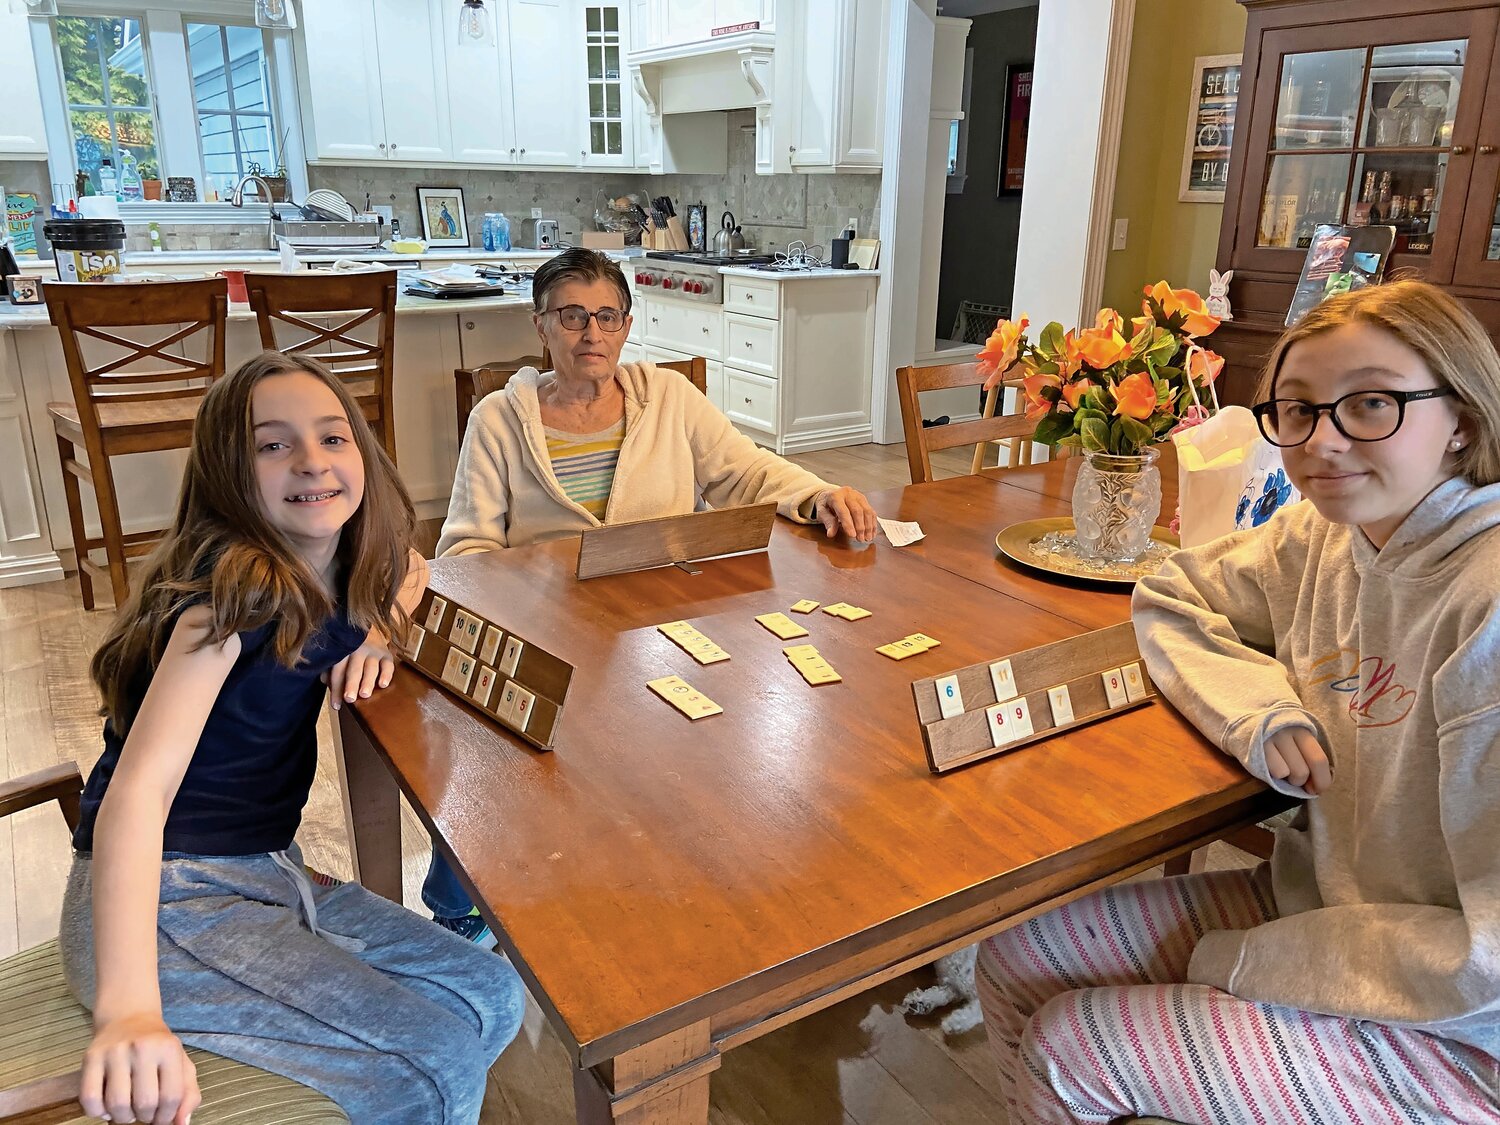 Seniors like Barbara Lillis, above center, spent much of the pandemic at home playing games with relatives including her granddaughters Jordan, left, and Jessica.